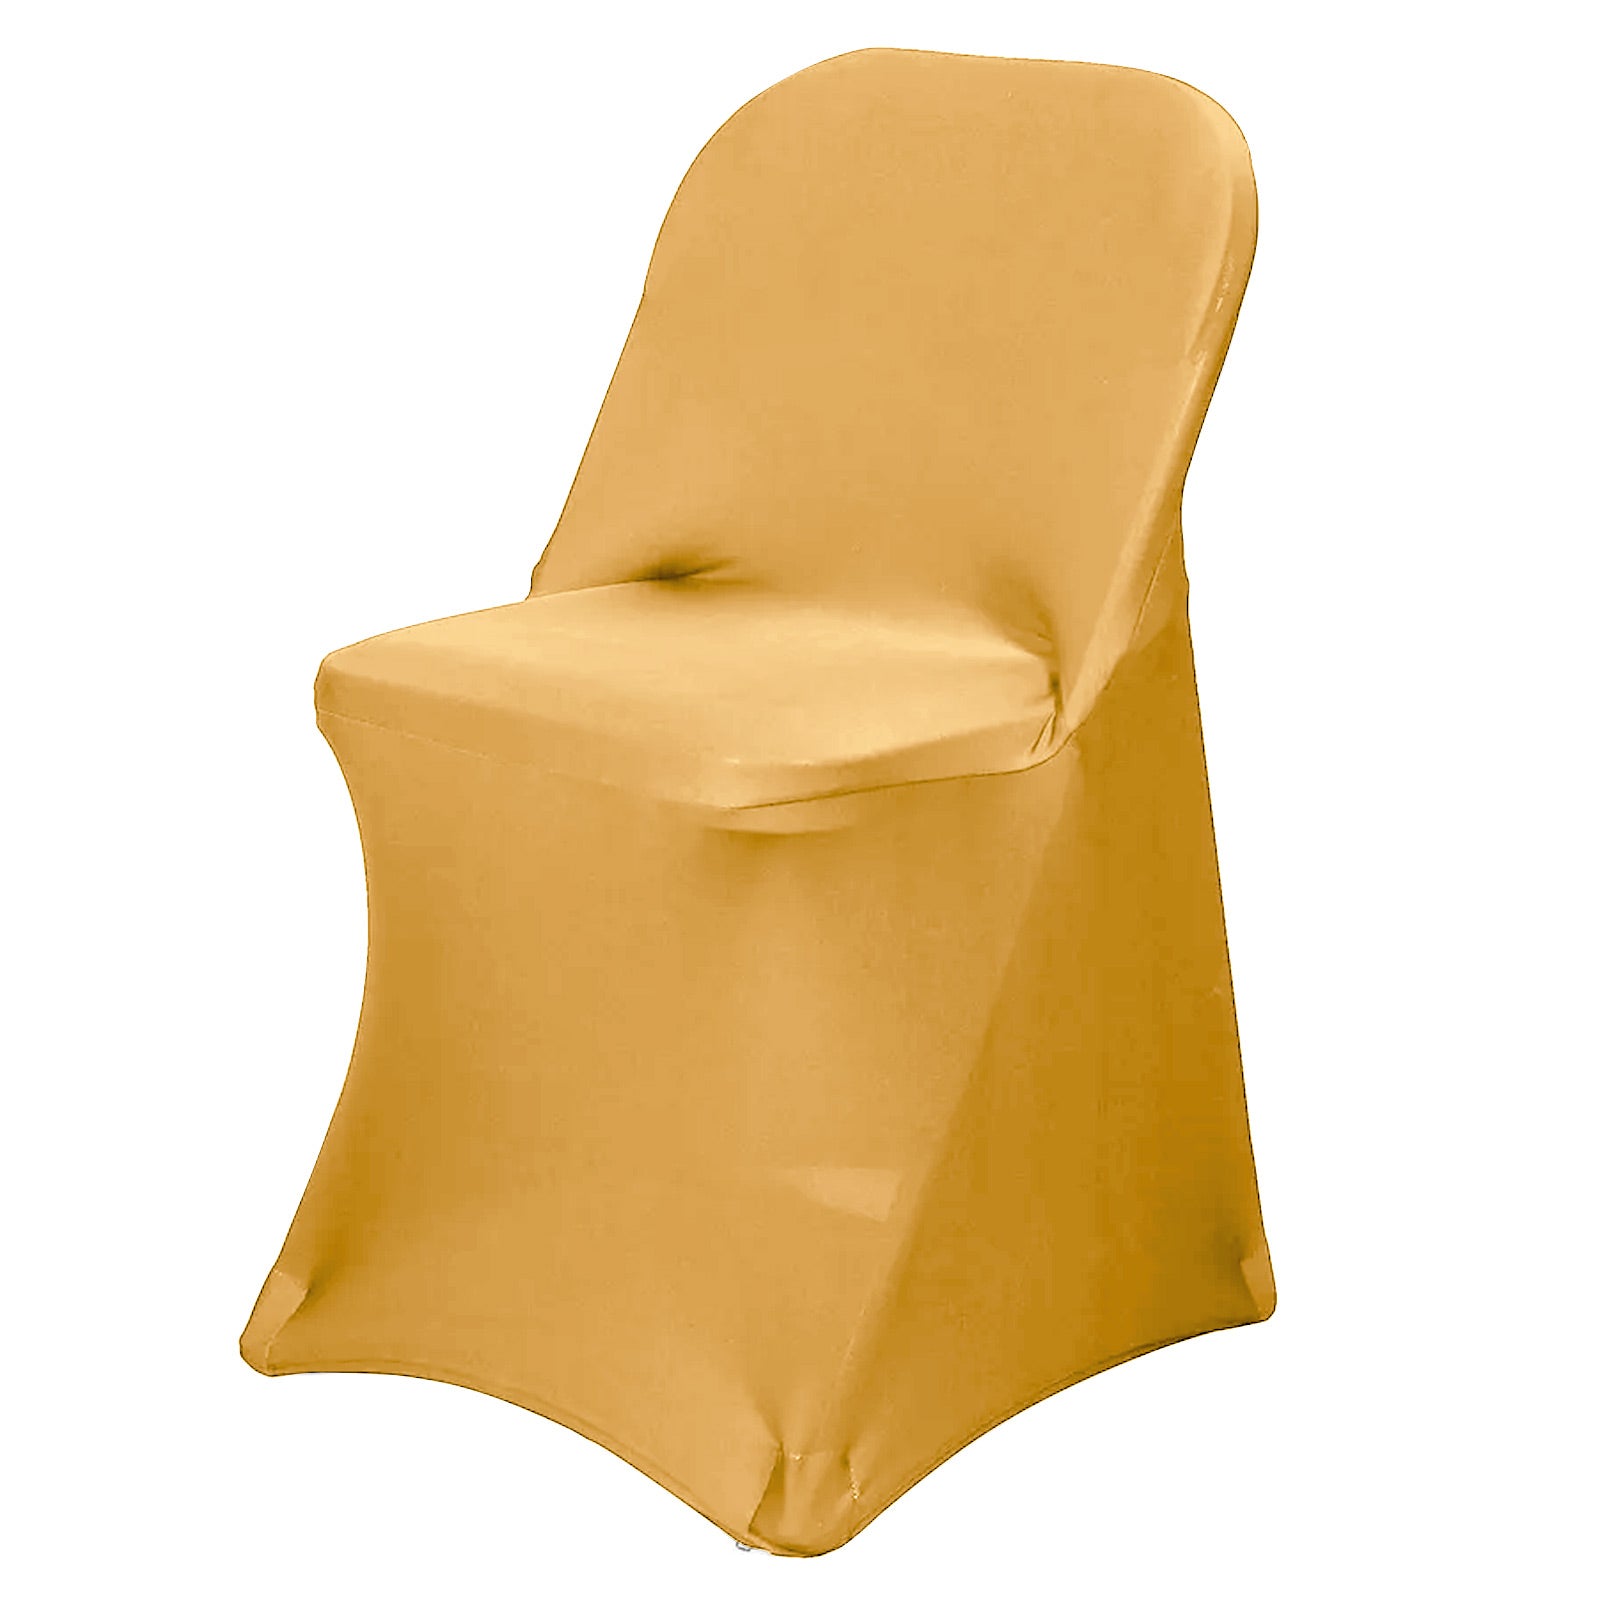 Apple Red Folding Spandex Chair Covers, Stretch Lycra Folding